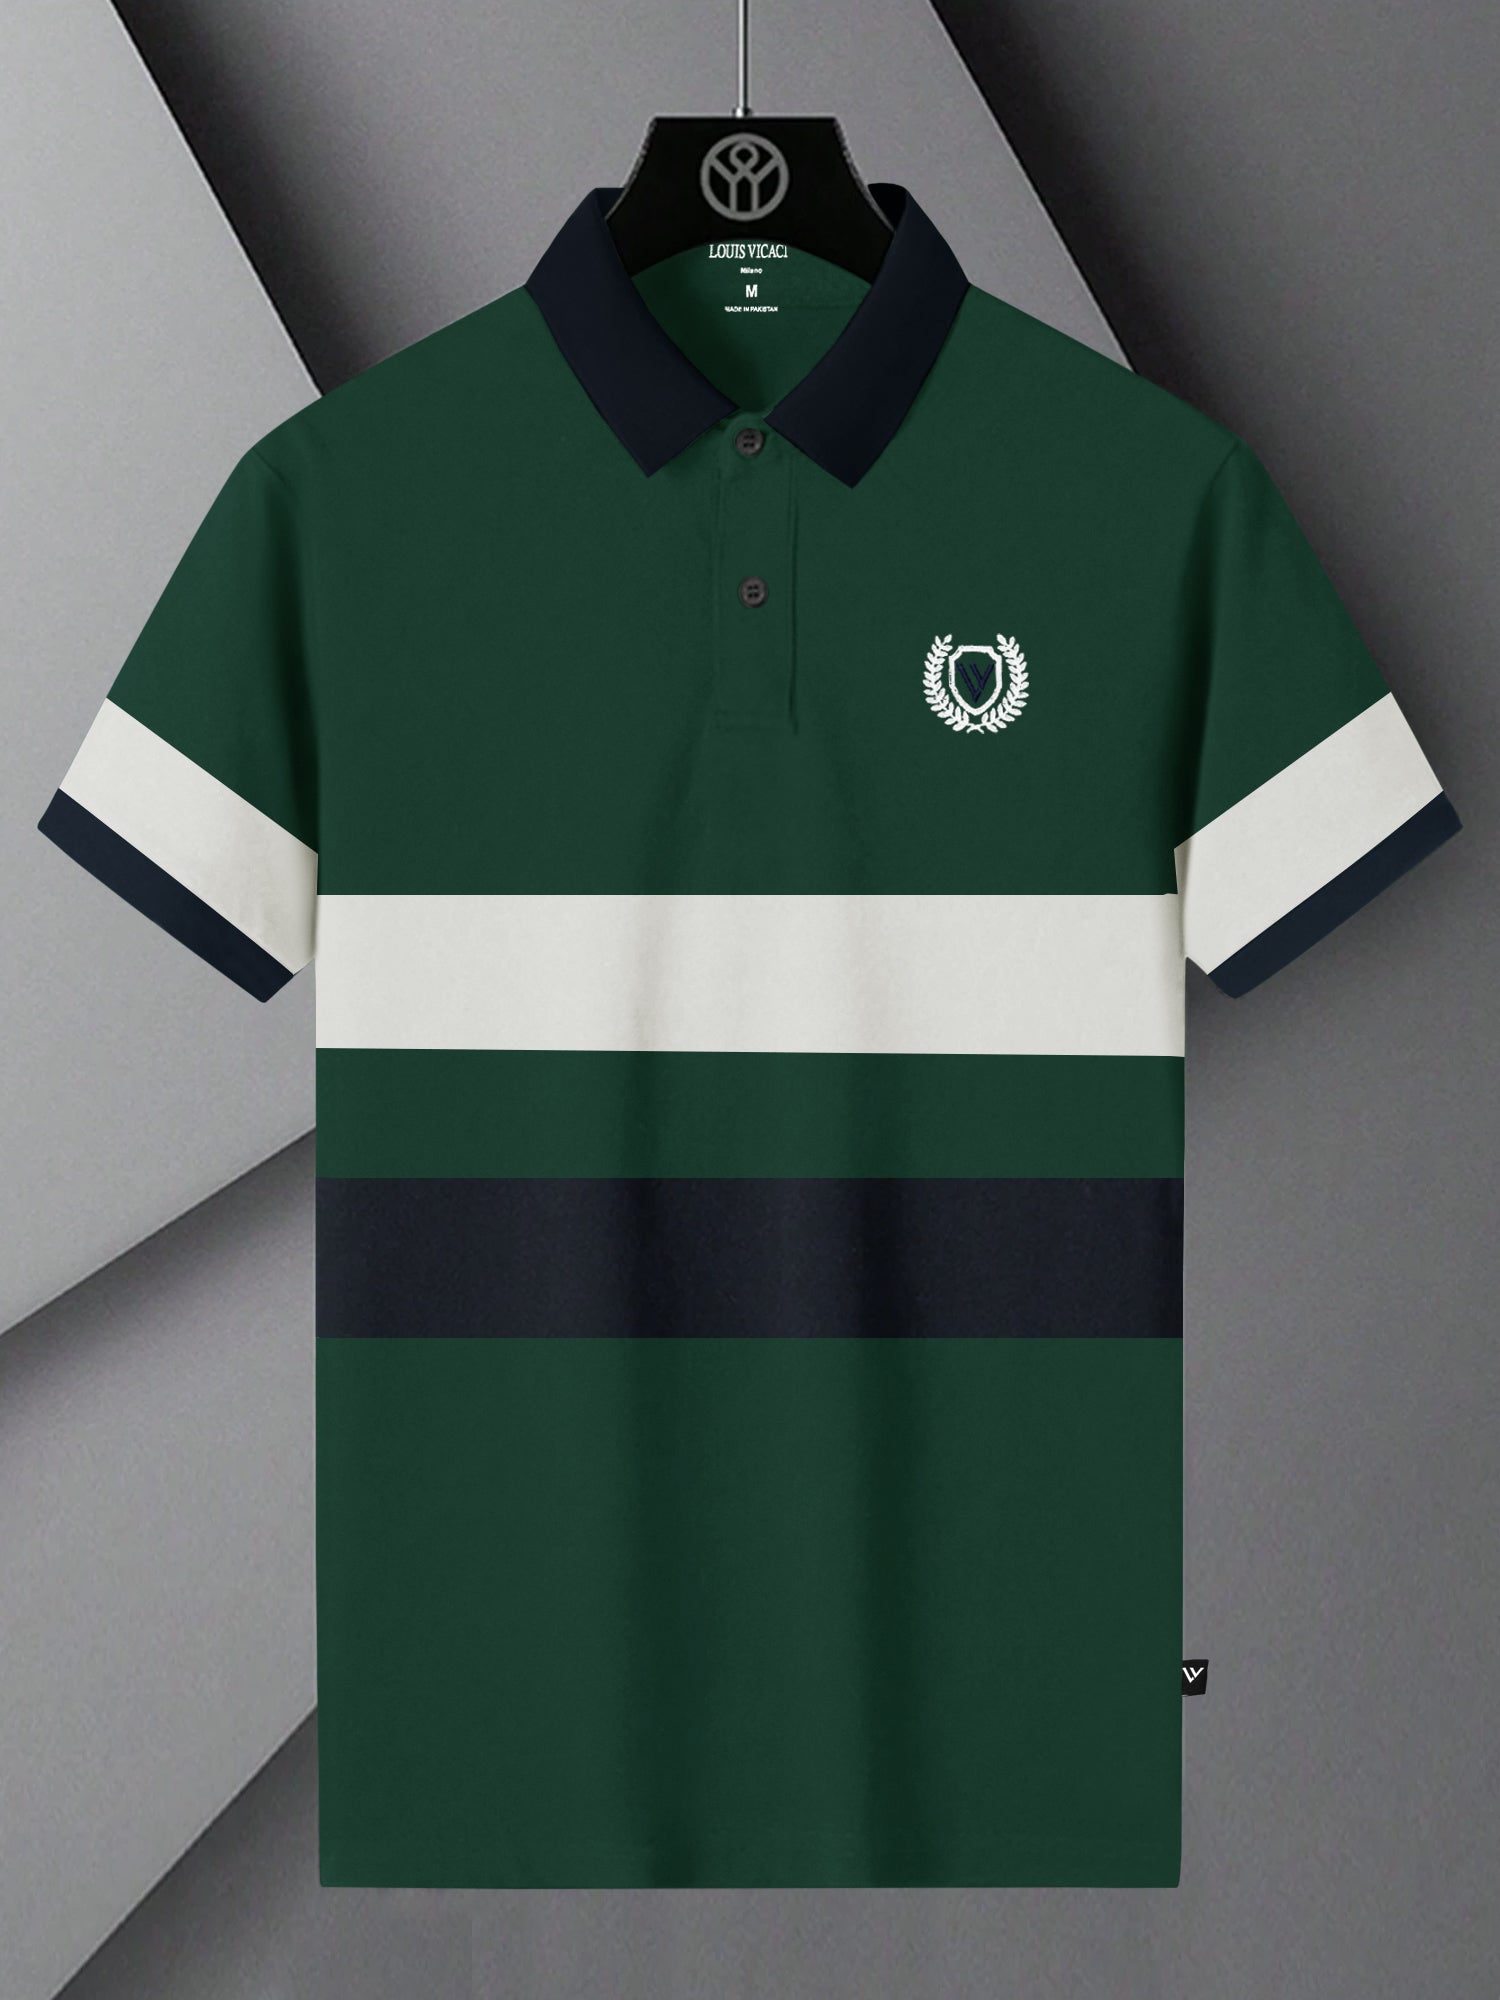 LV Summer Polo Shirt For Men- Dark Green with Navy-SP1505